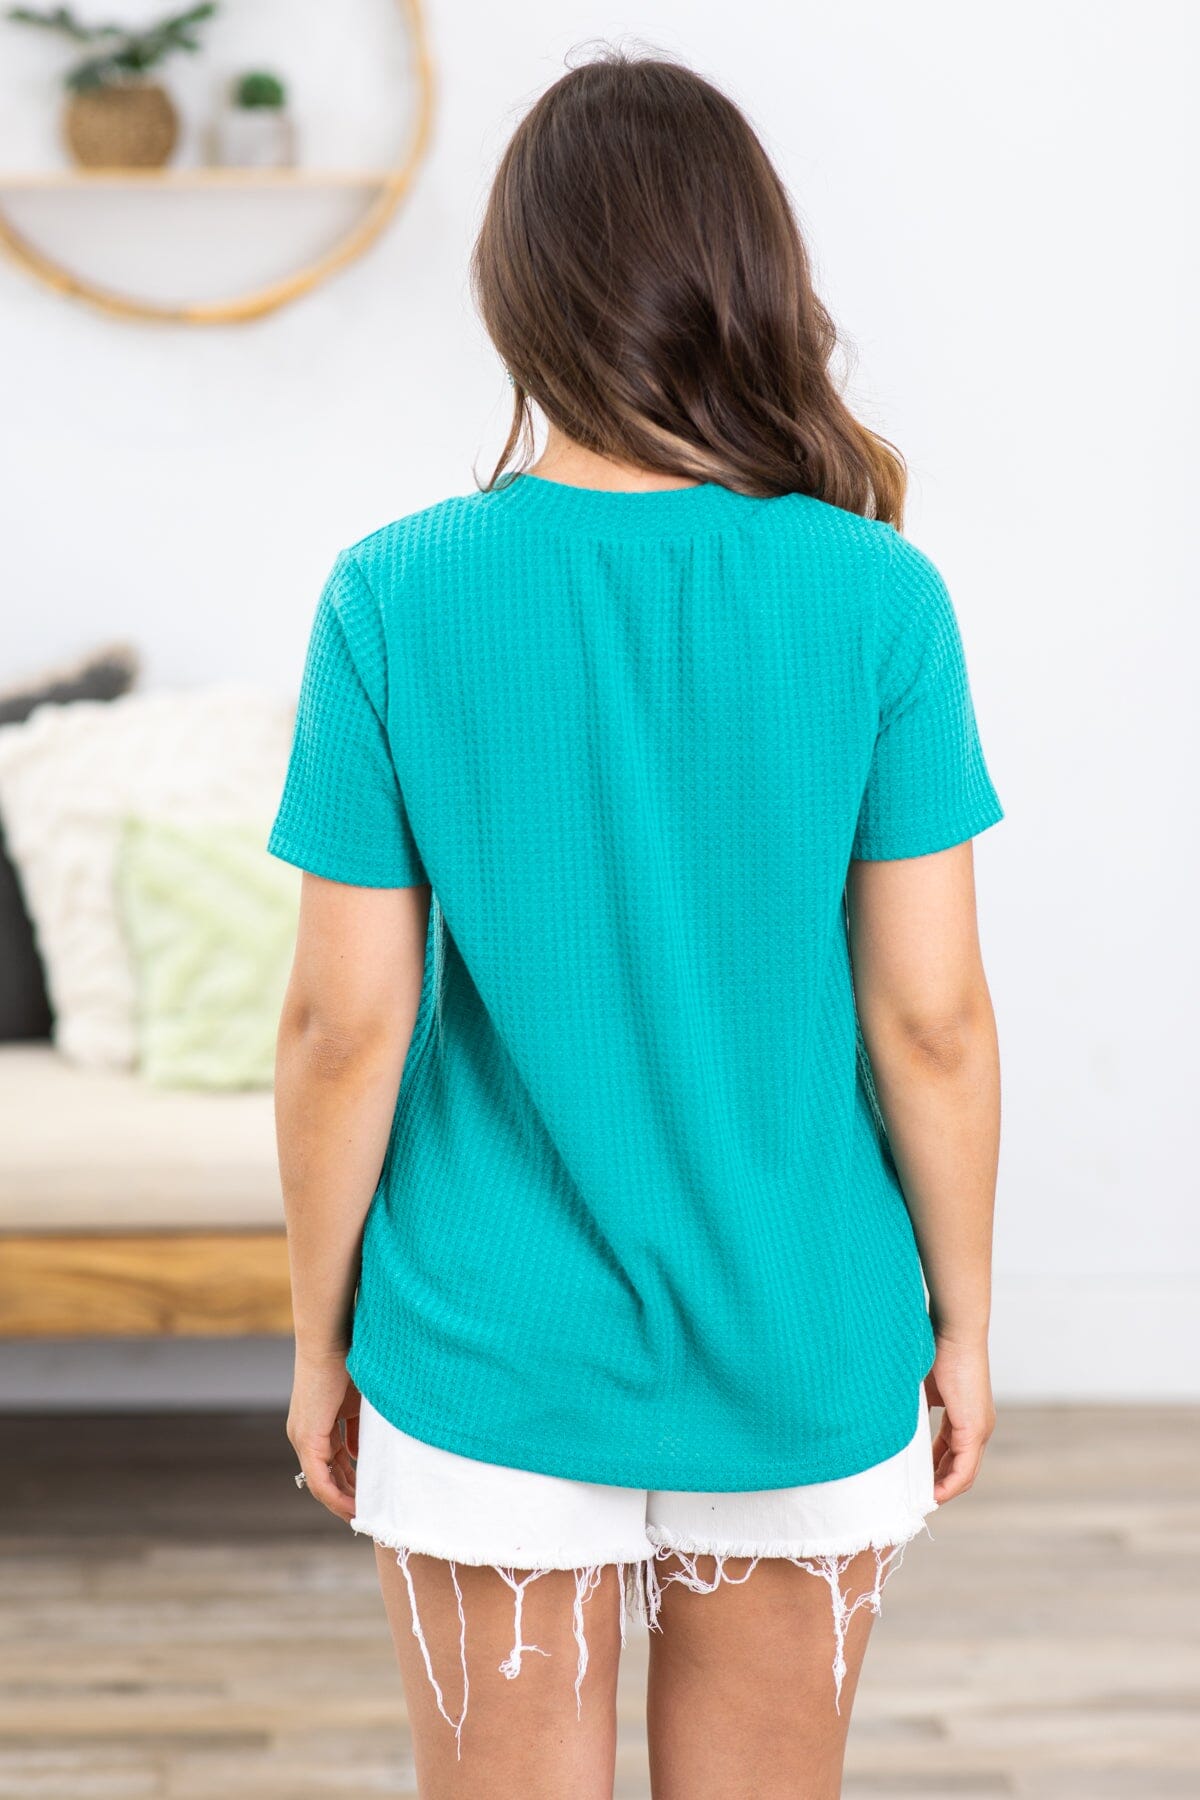 Turquoise Short Sleeve V-Neck Top - Filly Flair